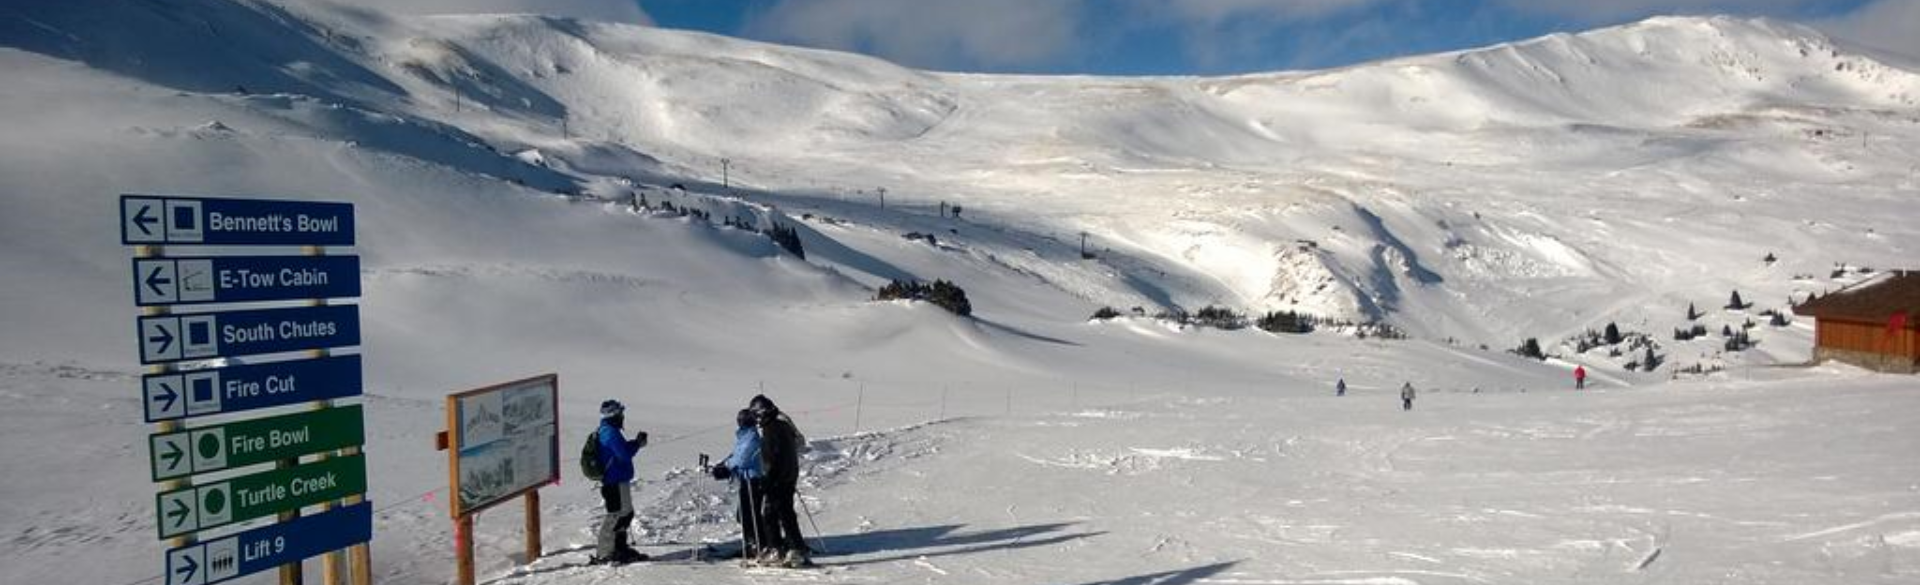 Skiers at Loveland Ski Area in Colorado. Photo by Mark Harden